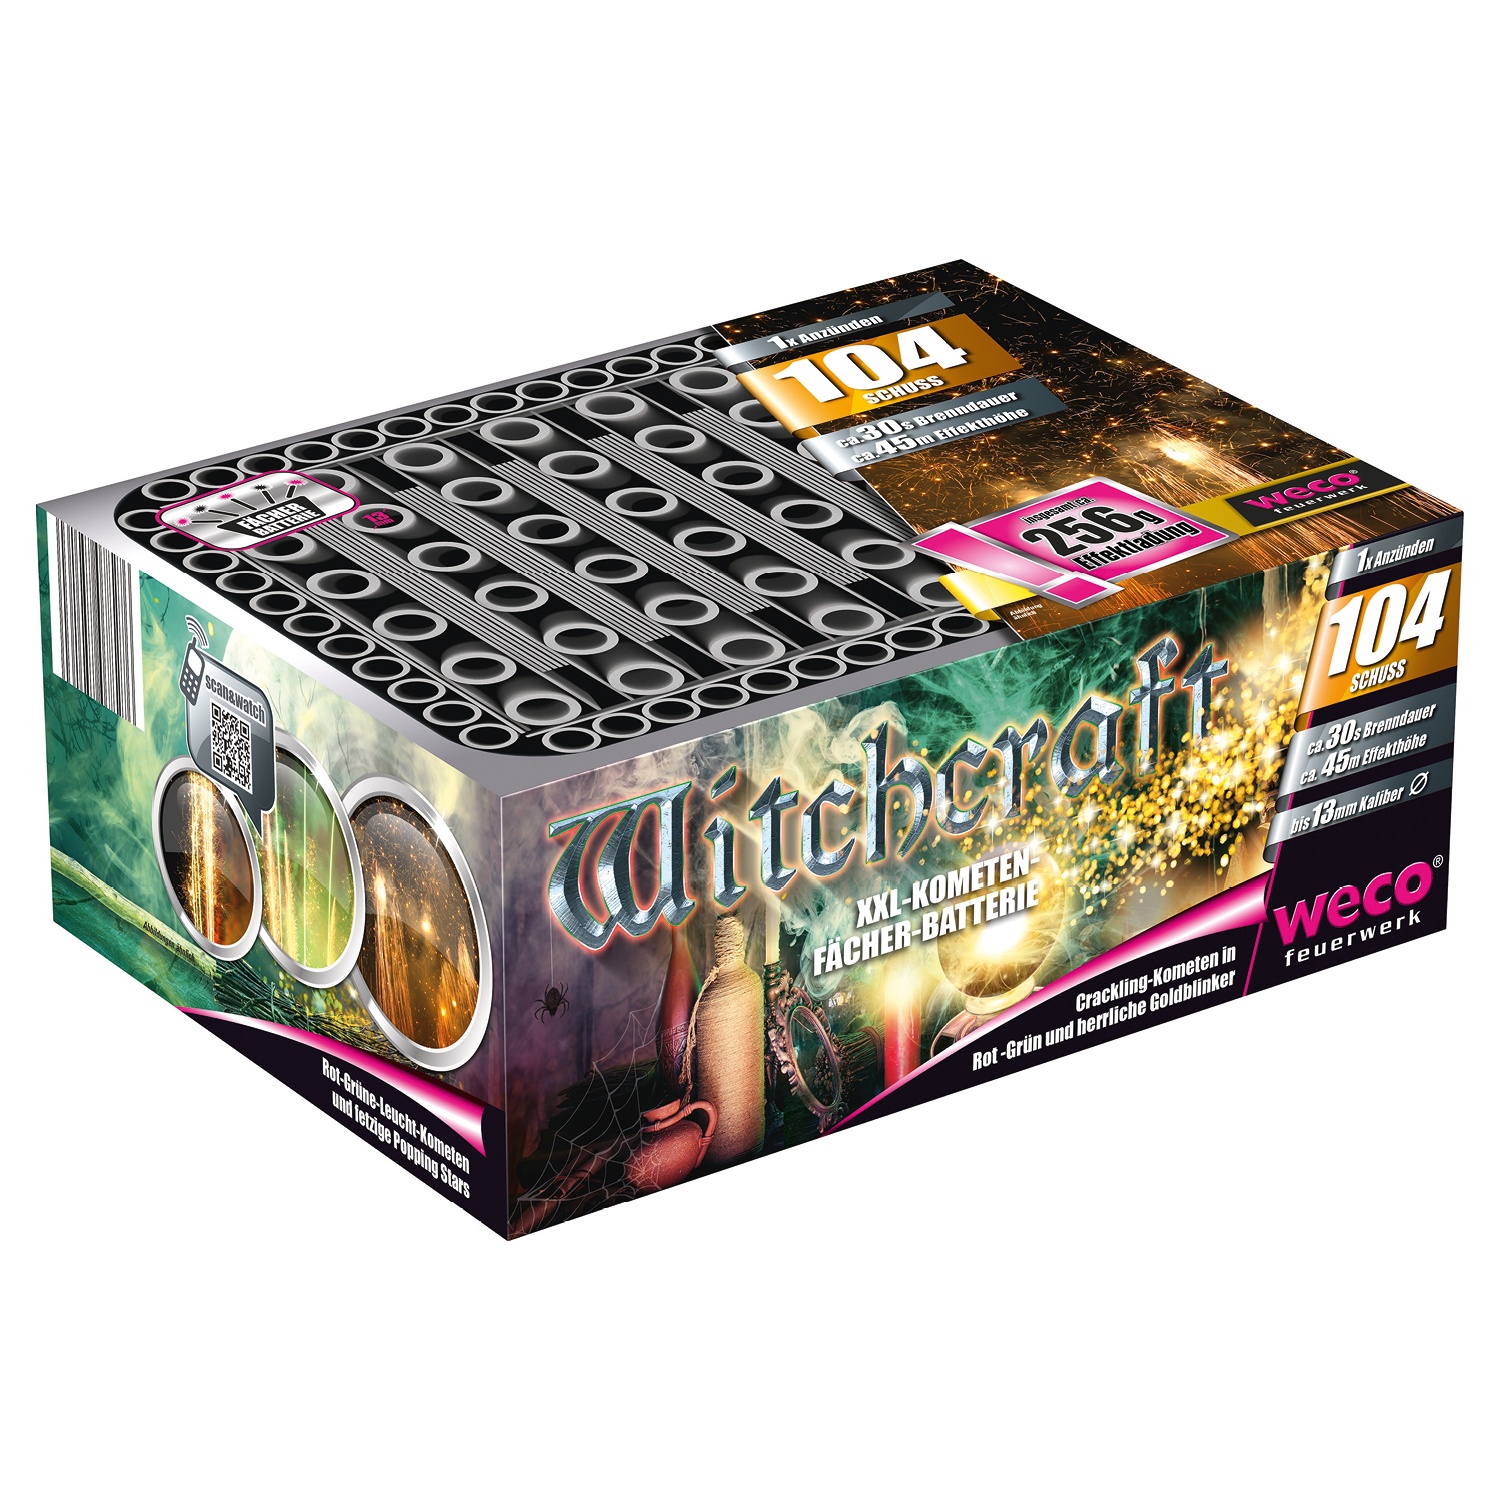 WECO® Batterie „Witchcraft“